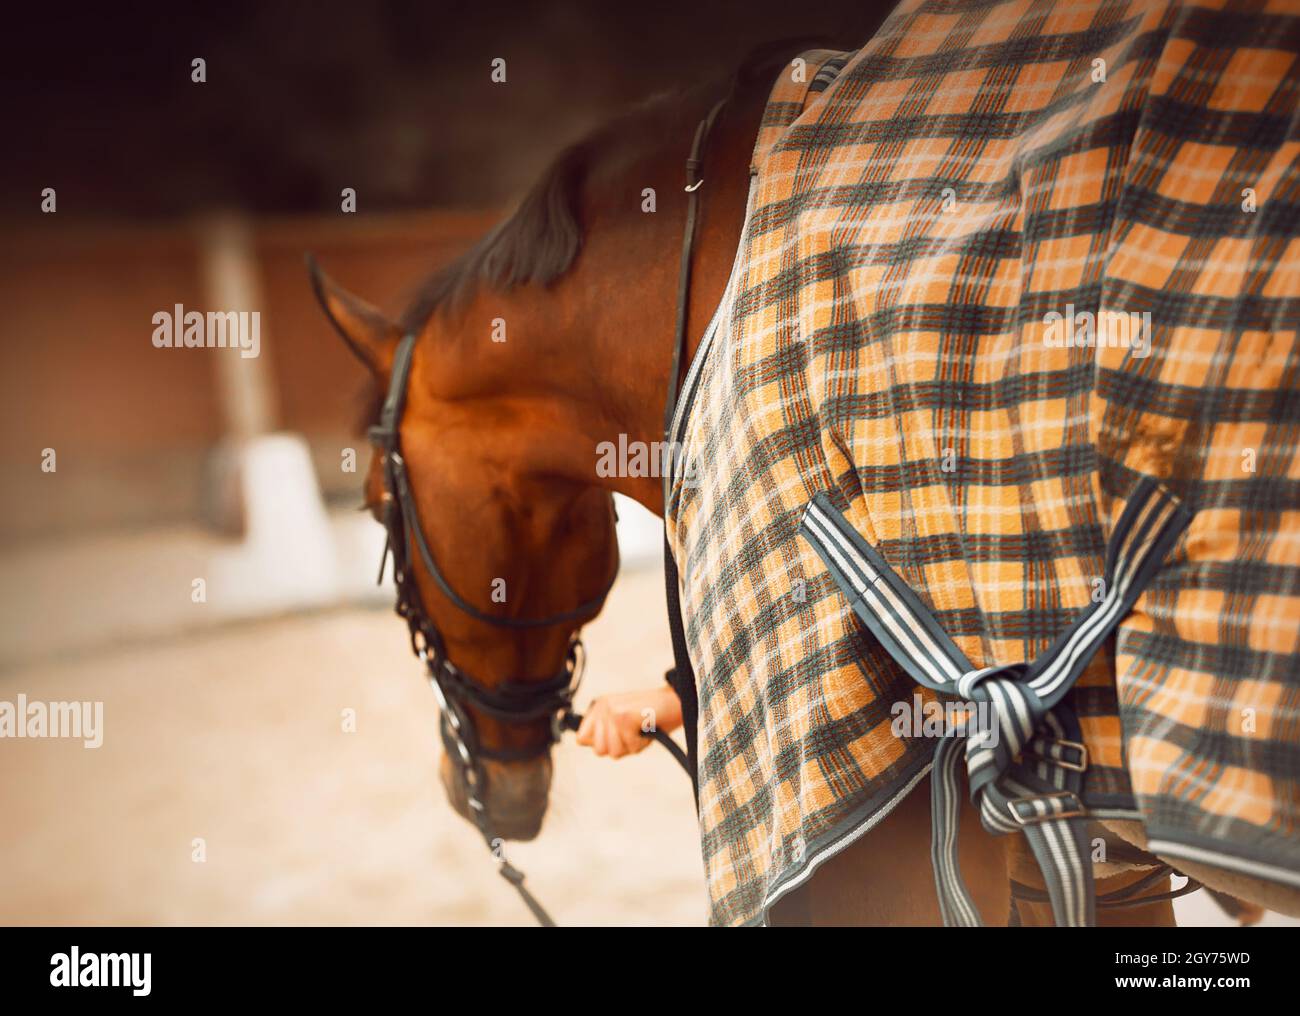 A rear view of a bay horse dressed in a checkered yellow blanket, which a horse breeder holds by the bridle reins on a cold day. Equestrian sports and Stock Photo